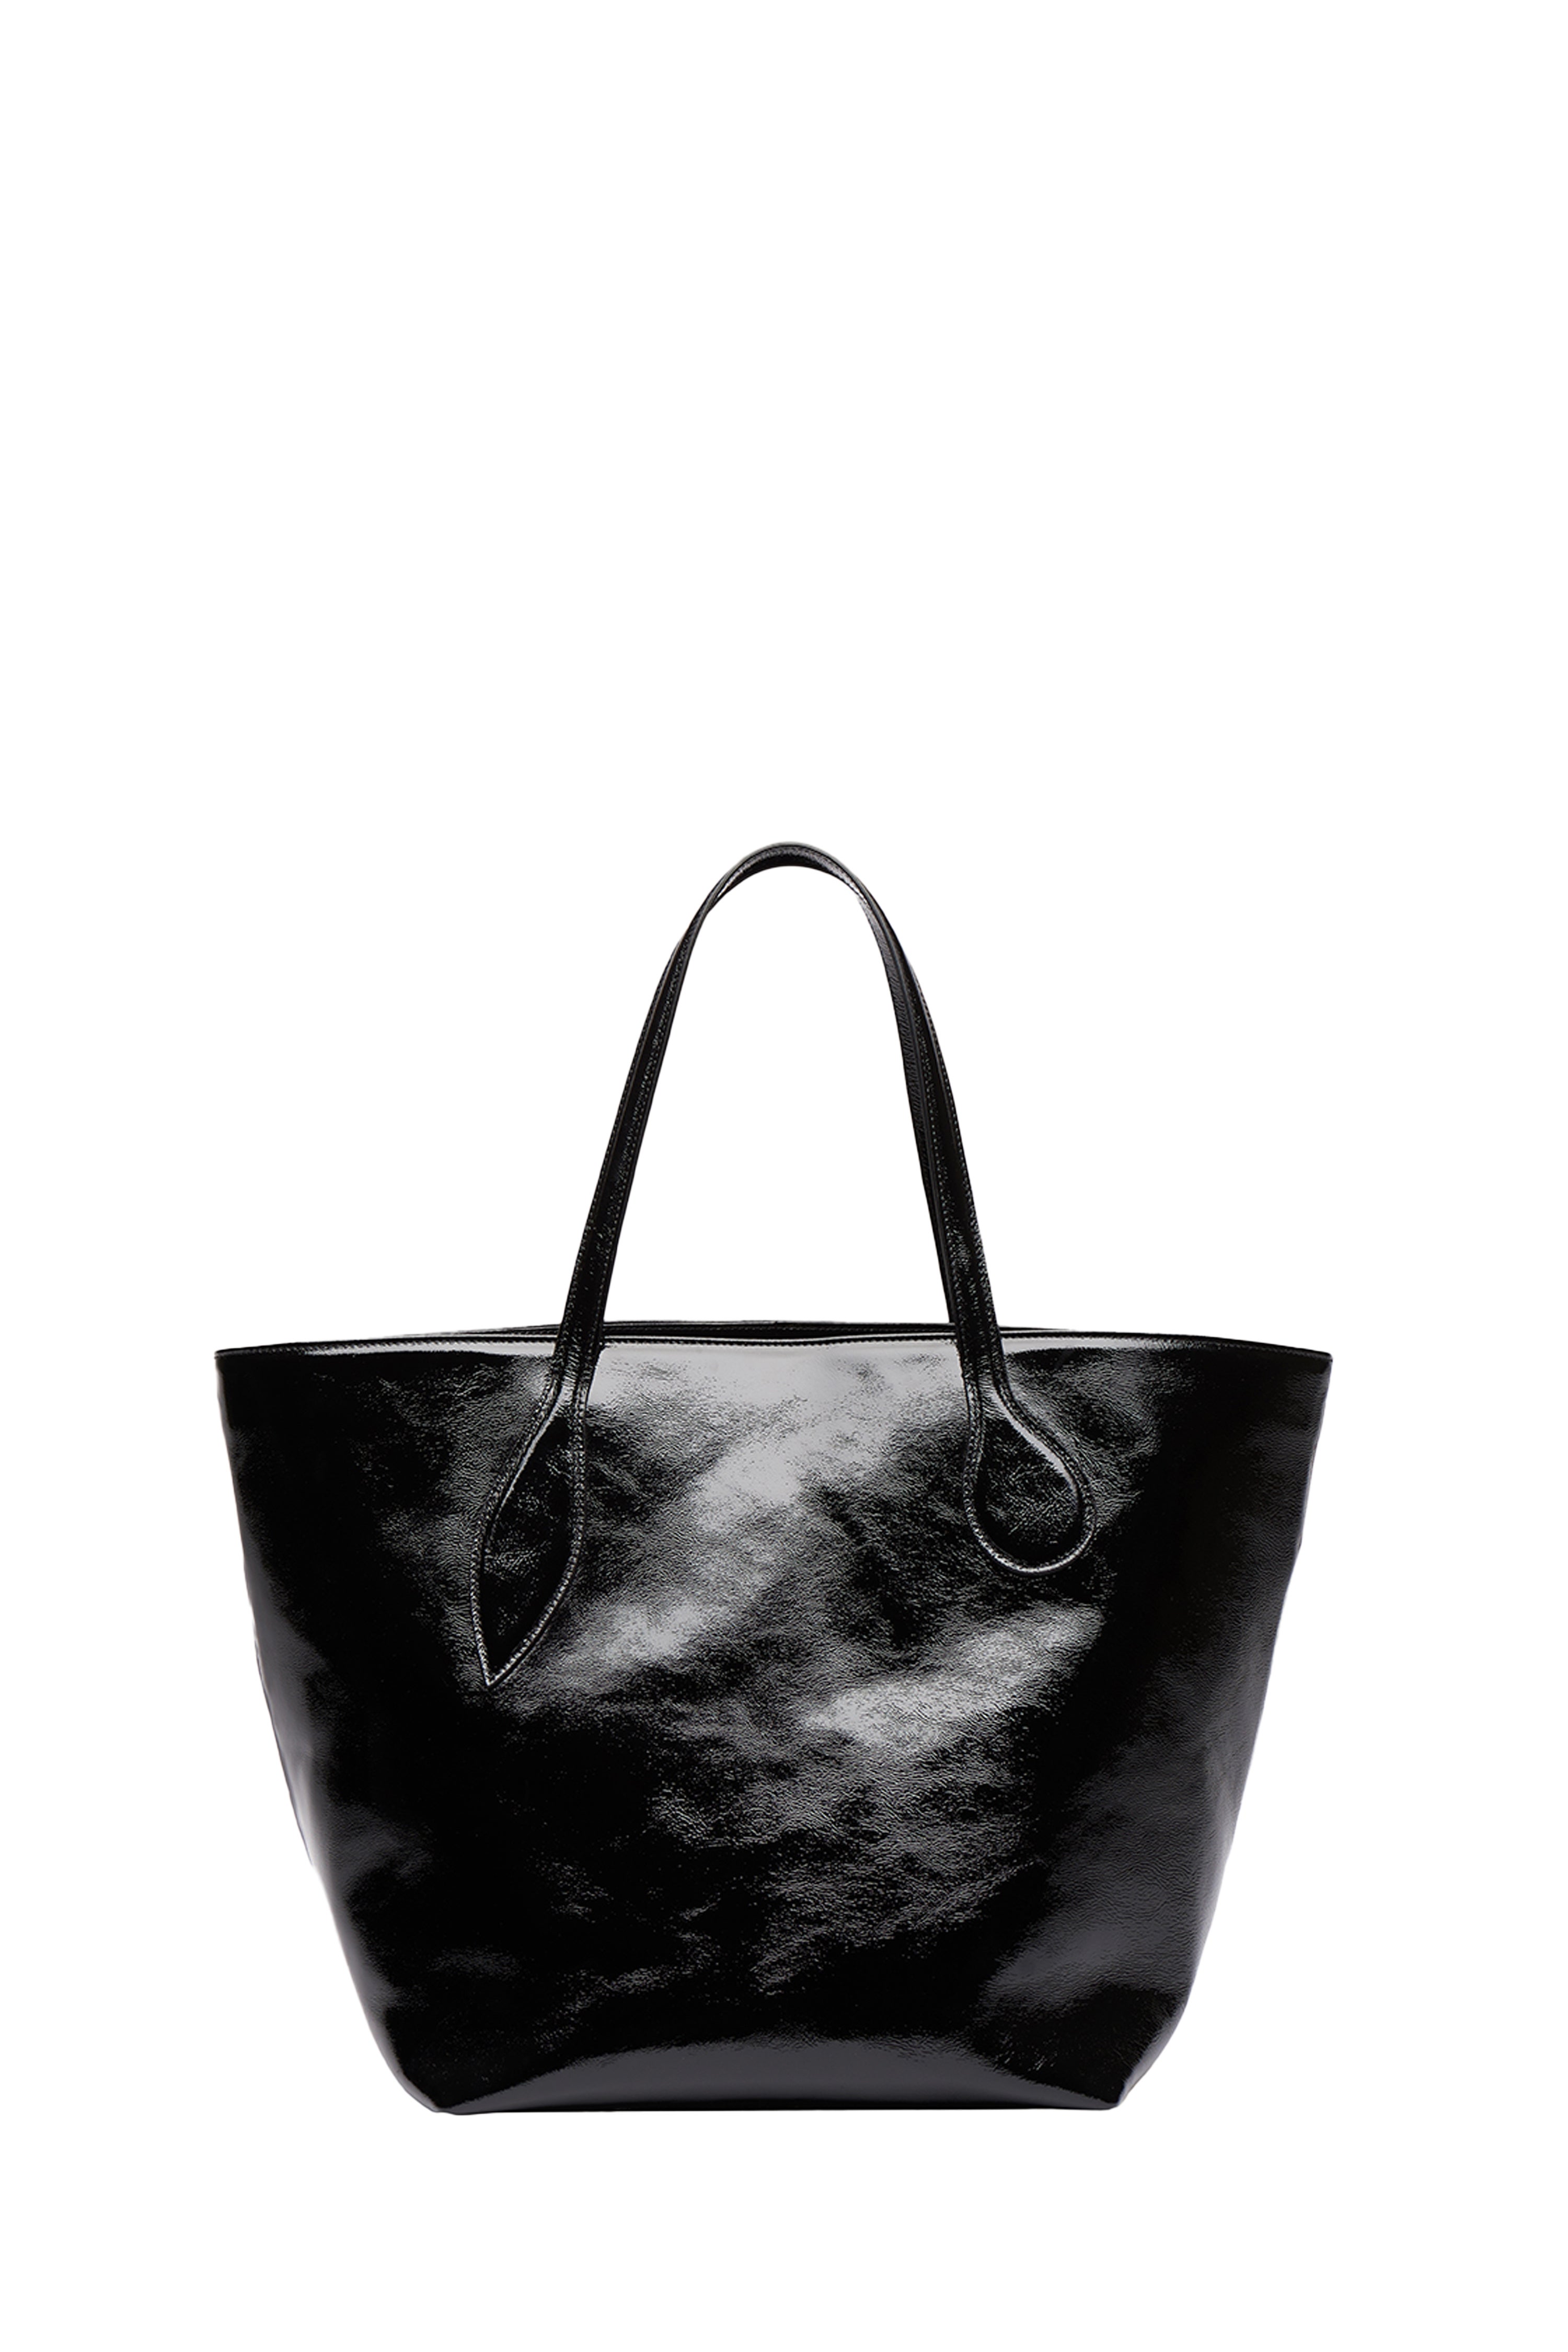 Sprout Tote Mini Black Leather - Little Liffner